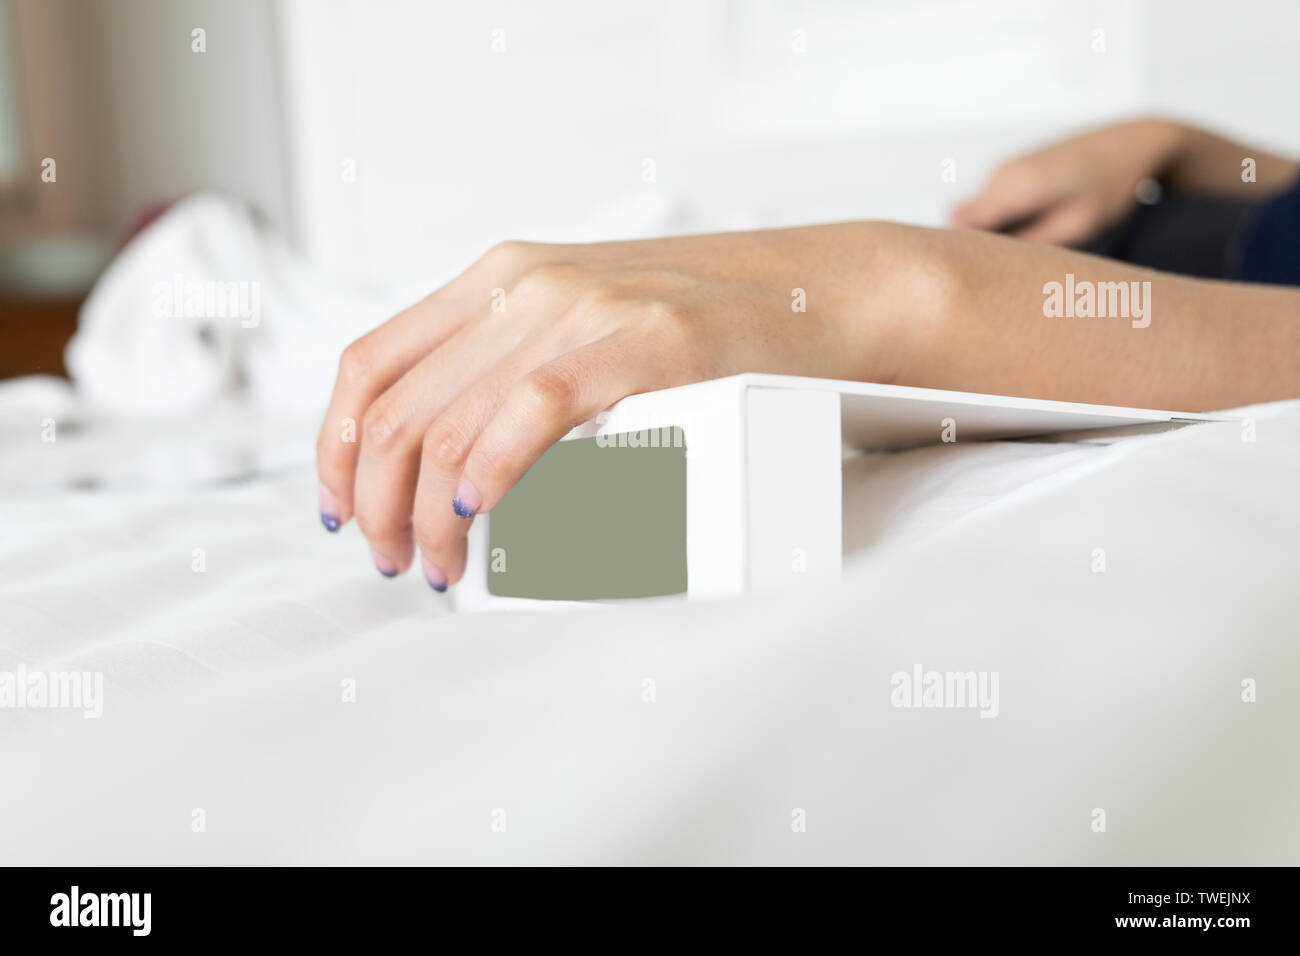 Woman Hand On White Digital Alarm Clock In Bedroom At